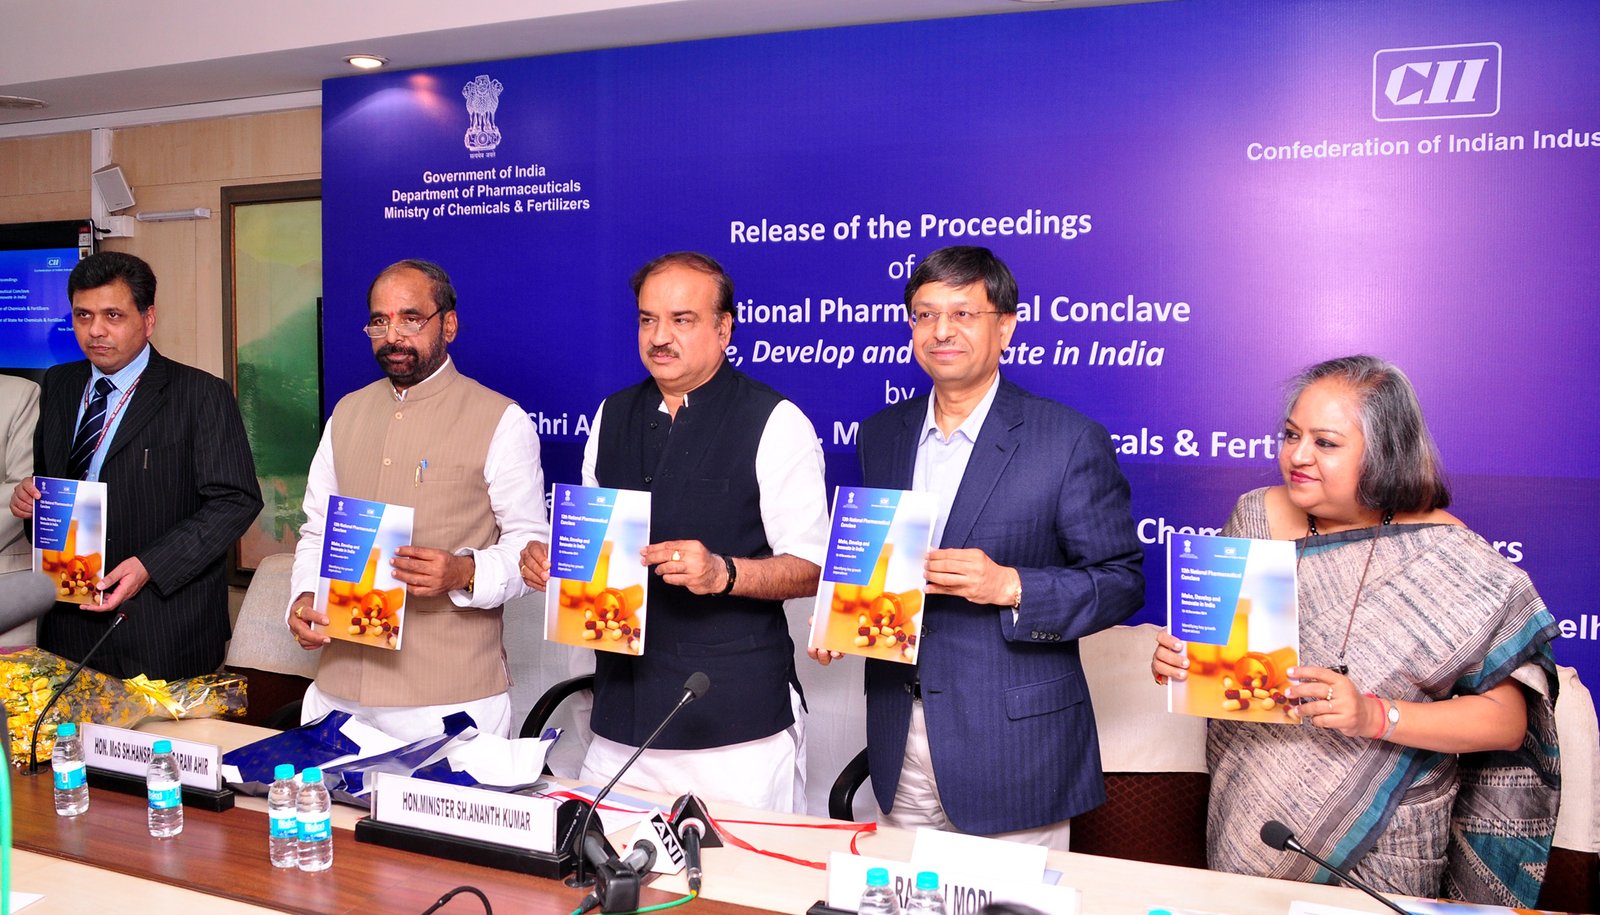 The Union Minister for Chemicals and Fertilizers, Mr Ananthkumar releasing the Proceedings of the 12th National Pharmaceuticals Conclave, in New Delhi on March 20, 2015. The Minister of State for Chemicals & Fertilizers, Mr Hansraj Gangaram Ahir and other